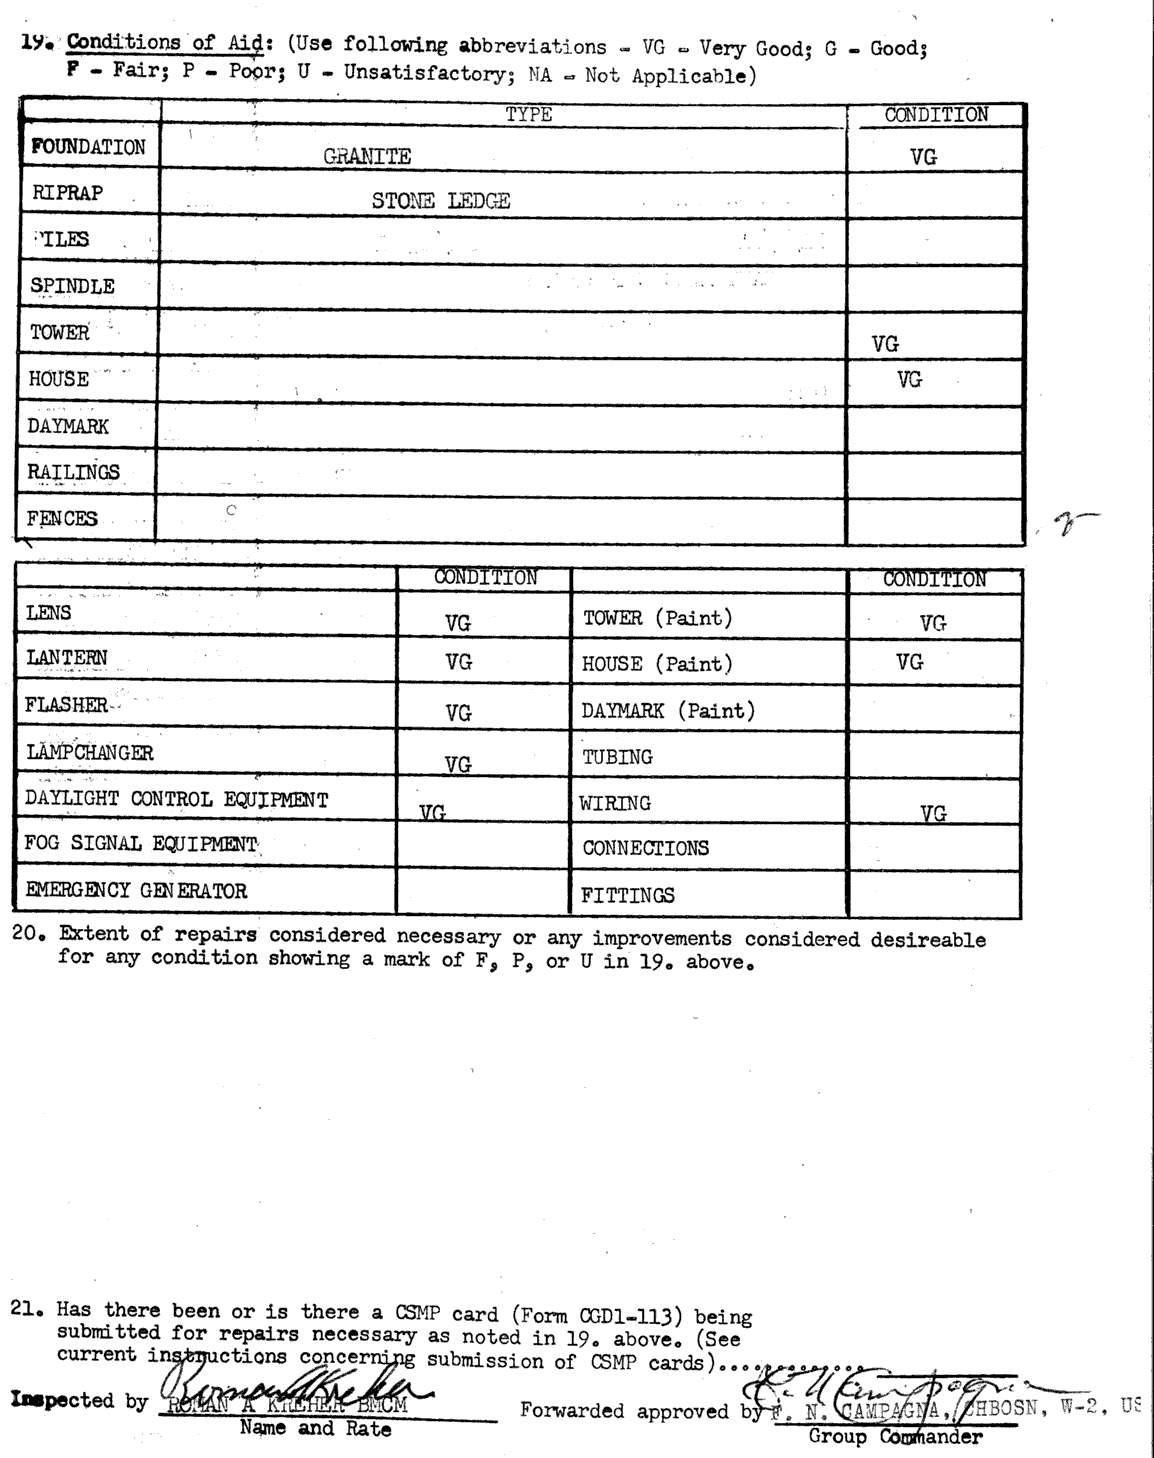 Fuller Rock Light - Semiannual Inspection Report of Minor Aid to Navigation 8/11/61